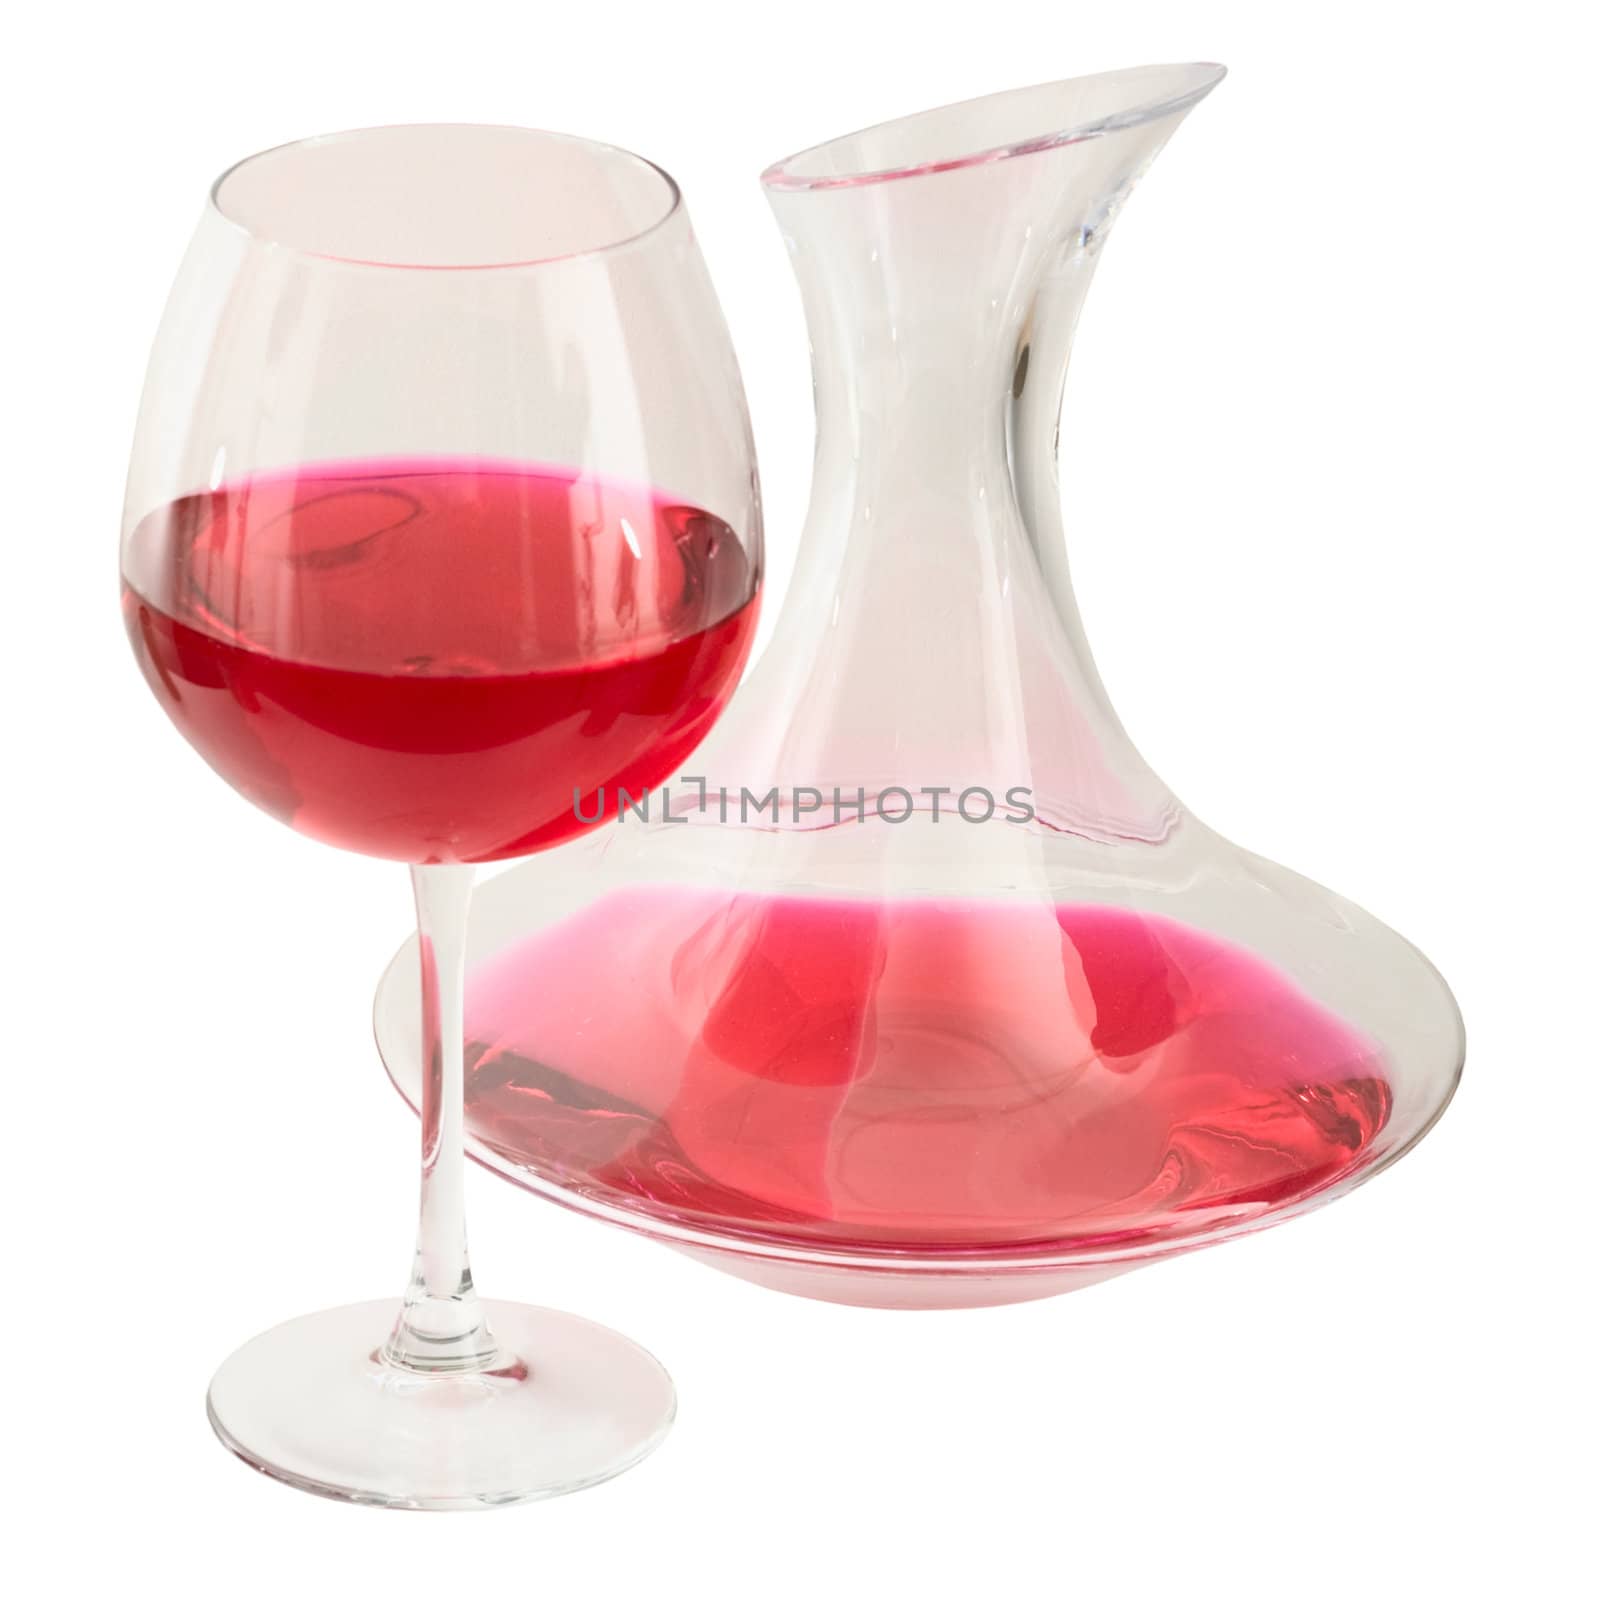 Decanter and goblet on the white background